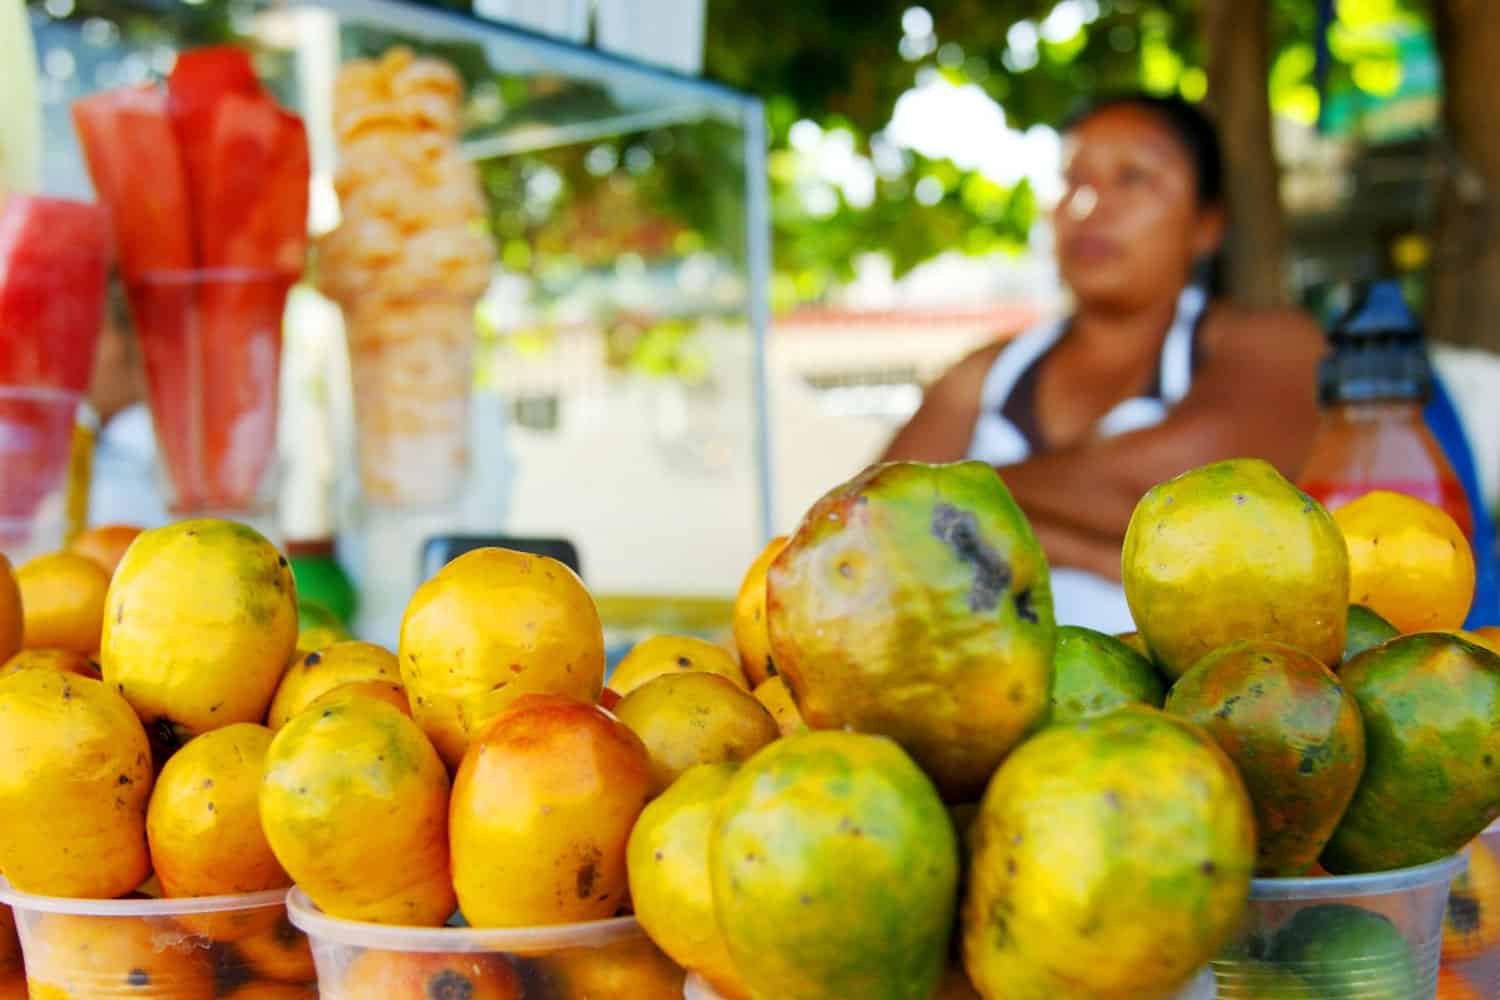 Ciruela aka jocote is one of the tastiest exotic fruits, it is common in Mexico, Central America and Brazil.